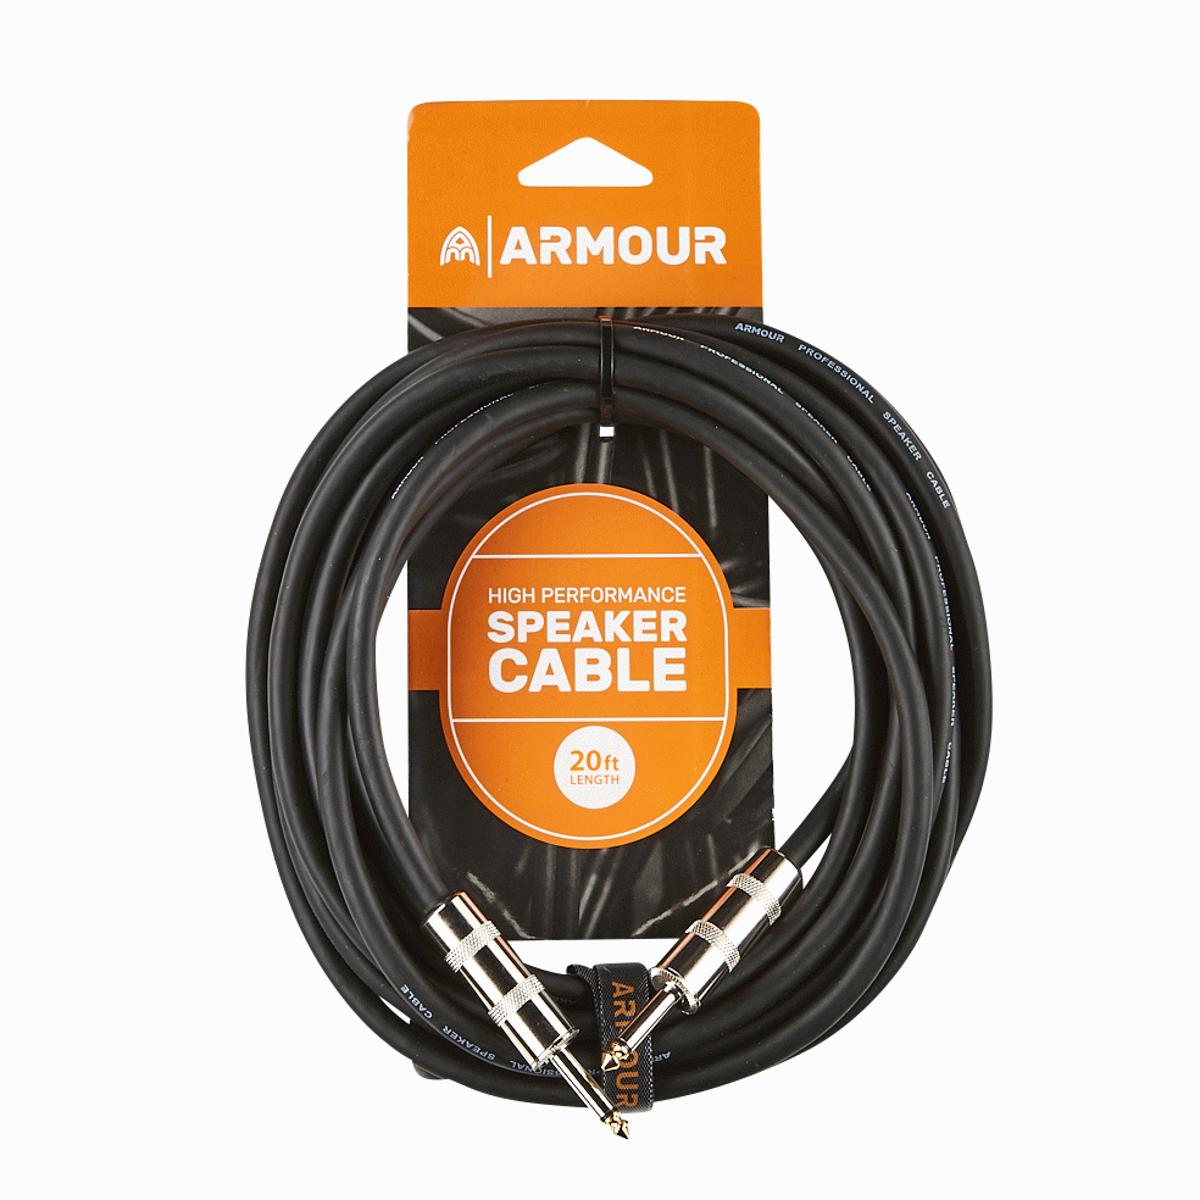 Armour SJP20 Speaker Cable 20ft Jack to Jack